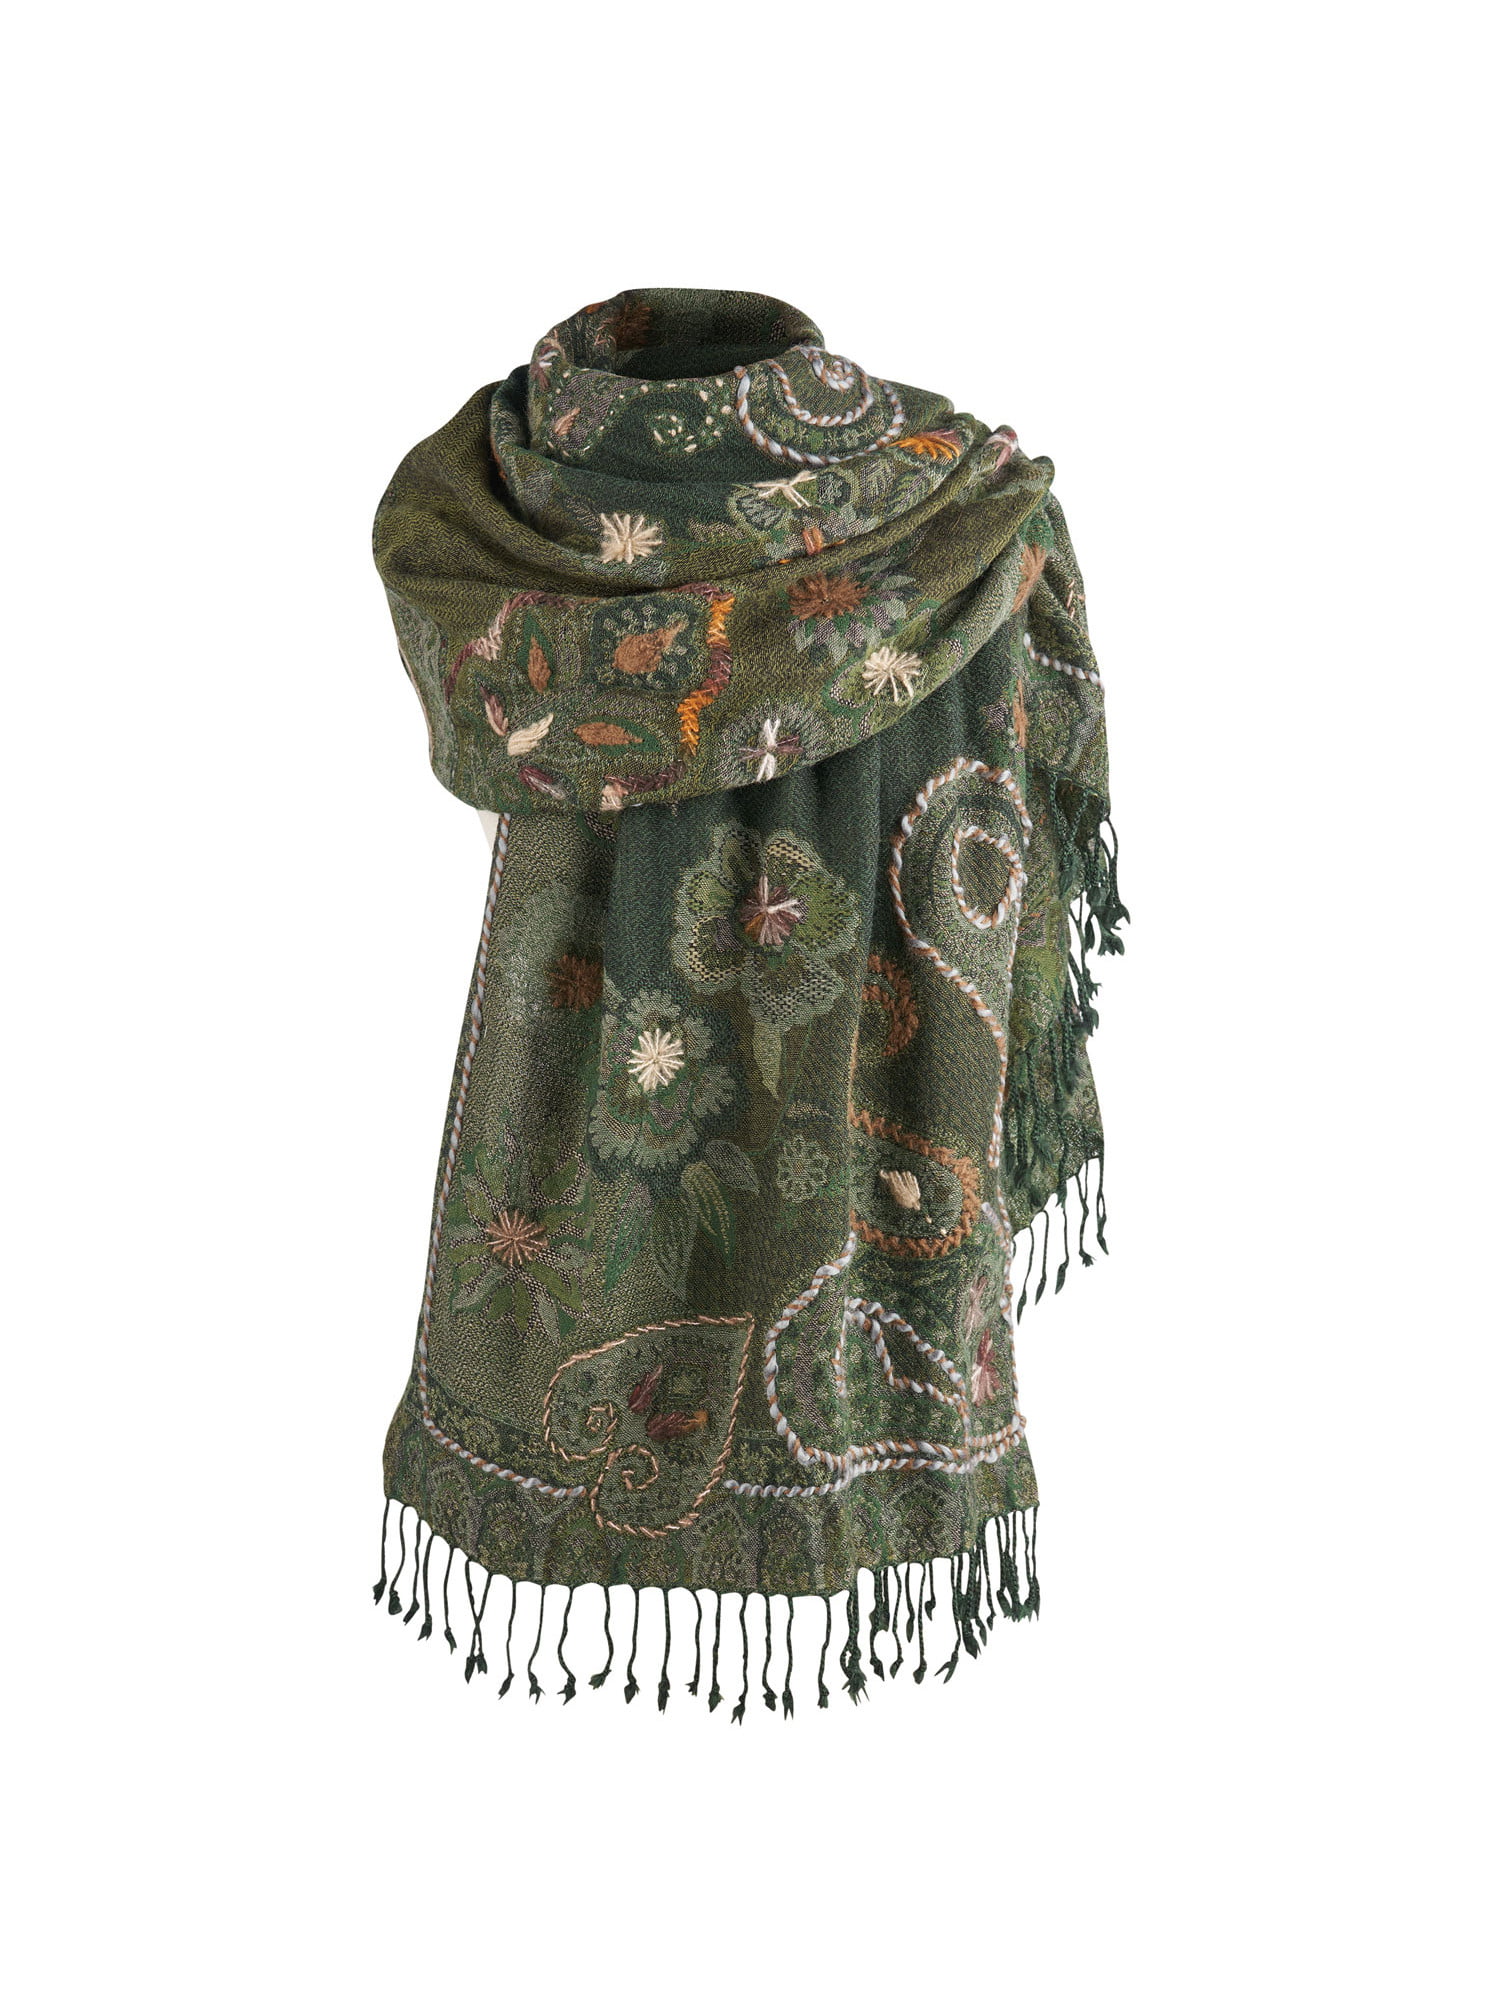 Gift for Her. Paisley pattern silk embroidered wool shawl Handmade wool scarf women